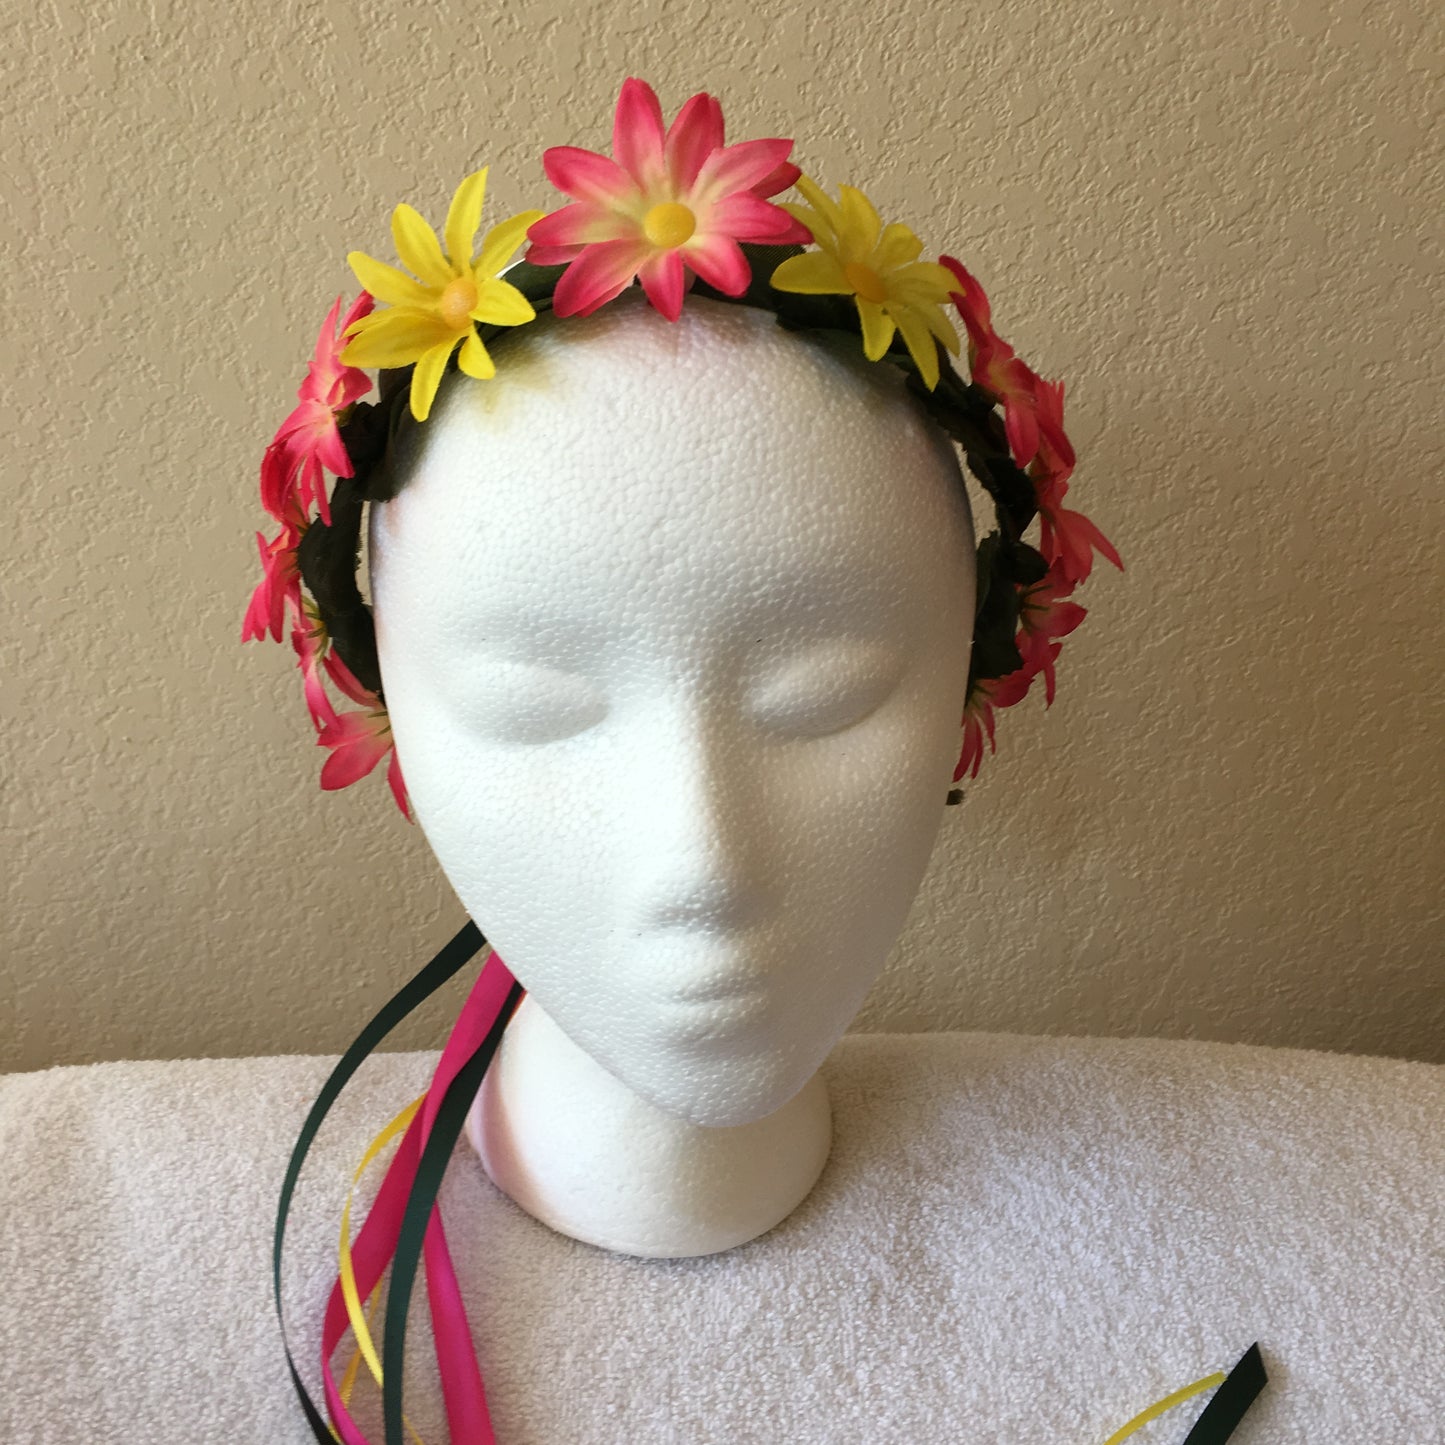 Small Wreath - Bright yellow daisies w/ pink to yellow daisies